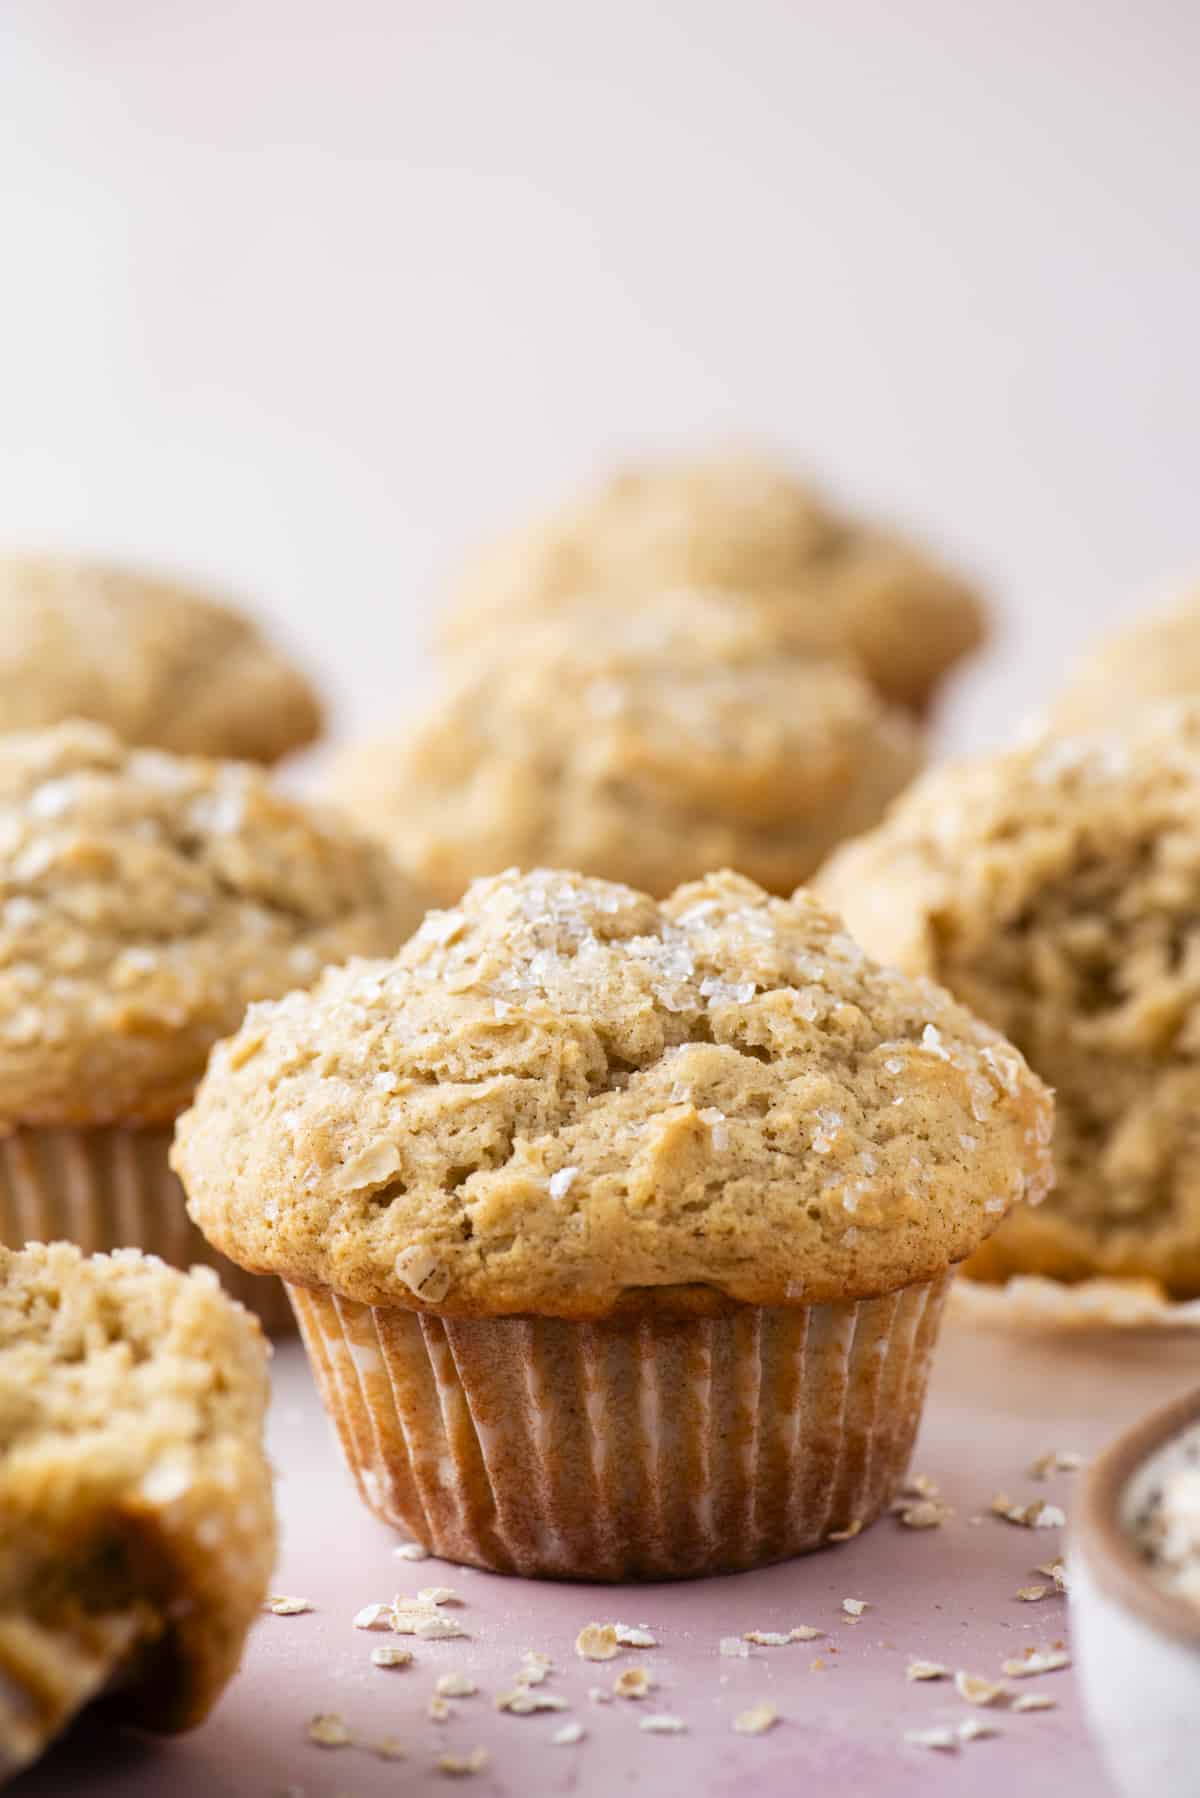 oatmeal muffins on a light pink surface with oats sprinkled around